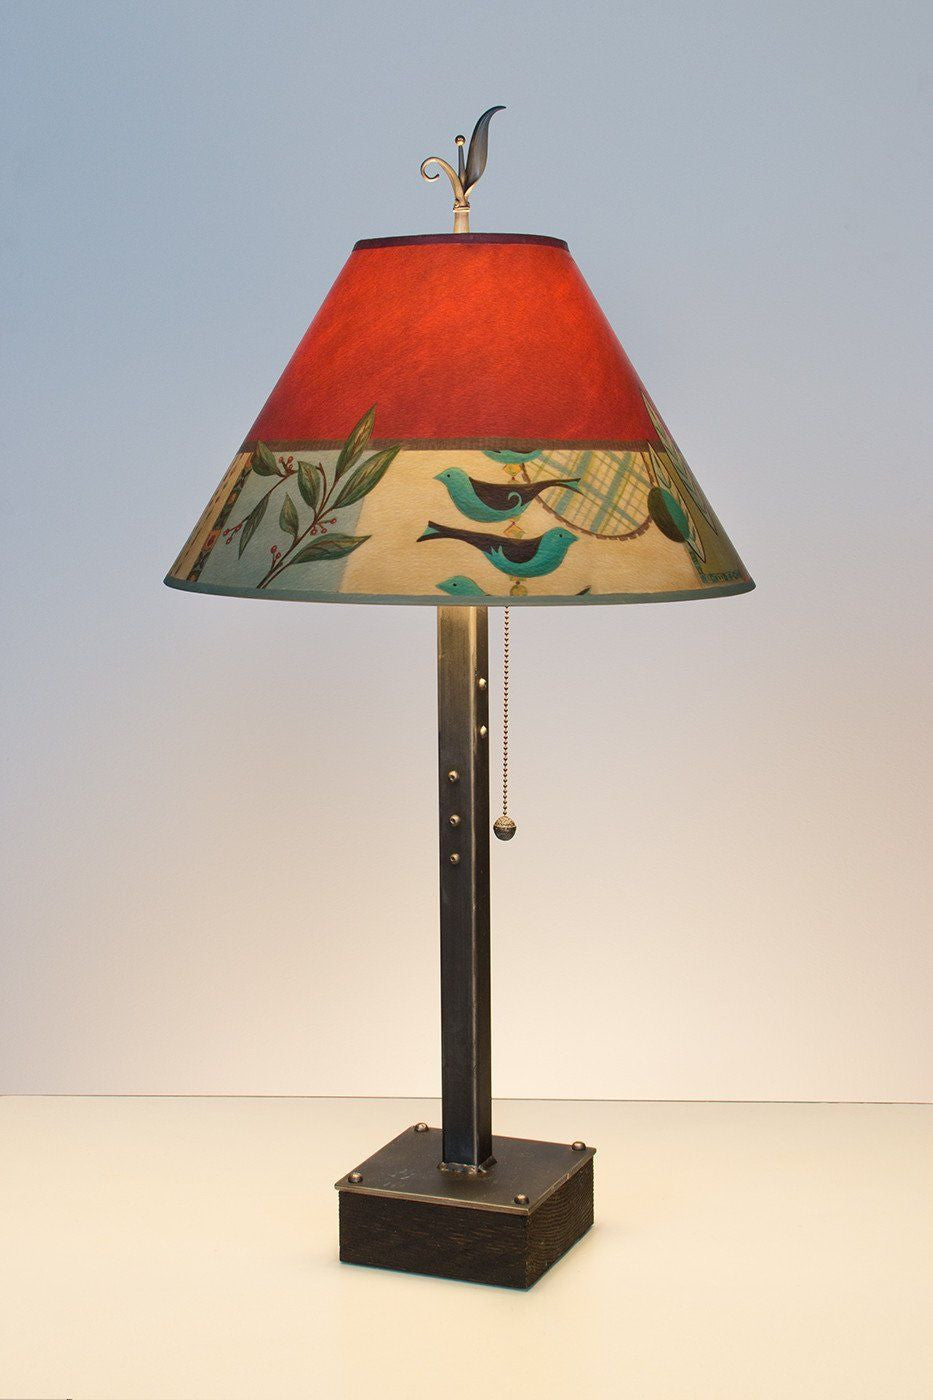 Steel Table Lamp on Wood with Medium Conical Shade in New Capri - Lit